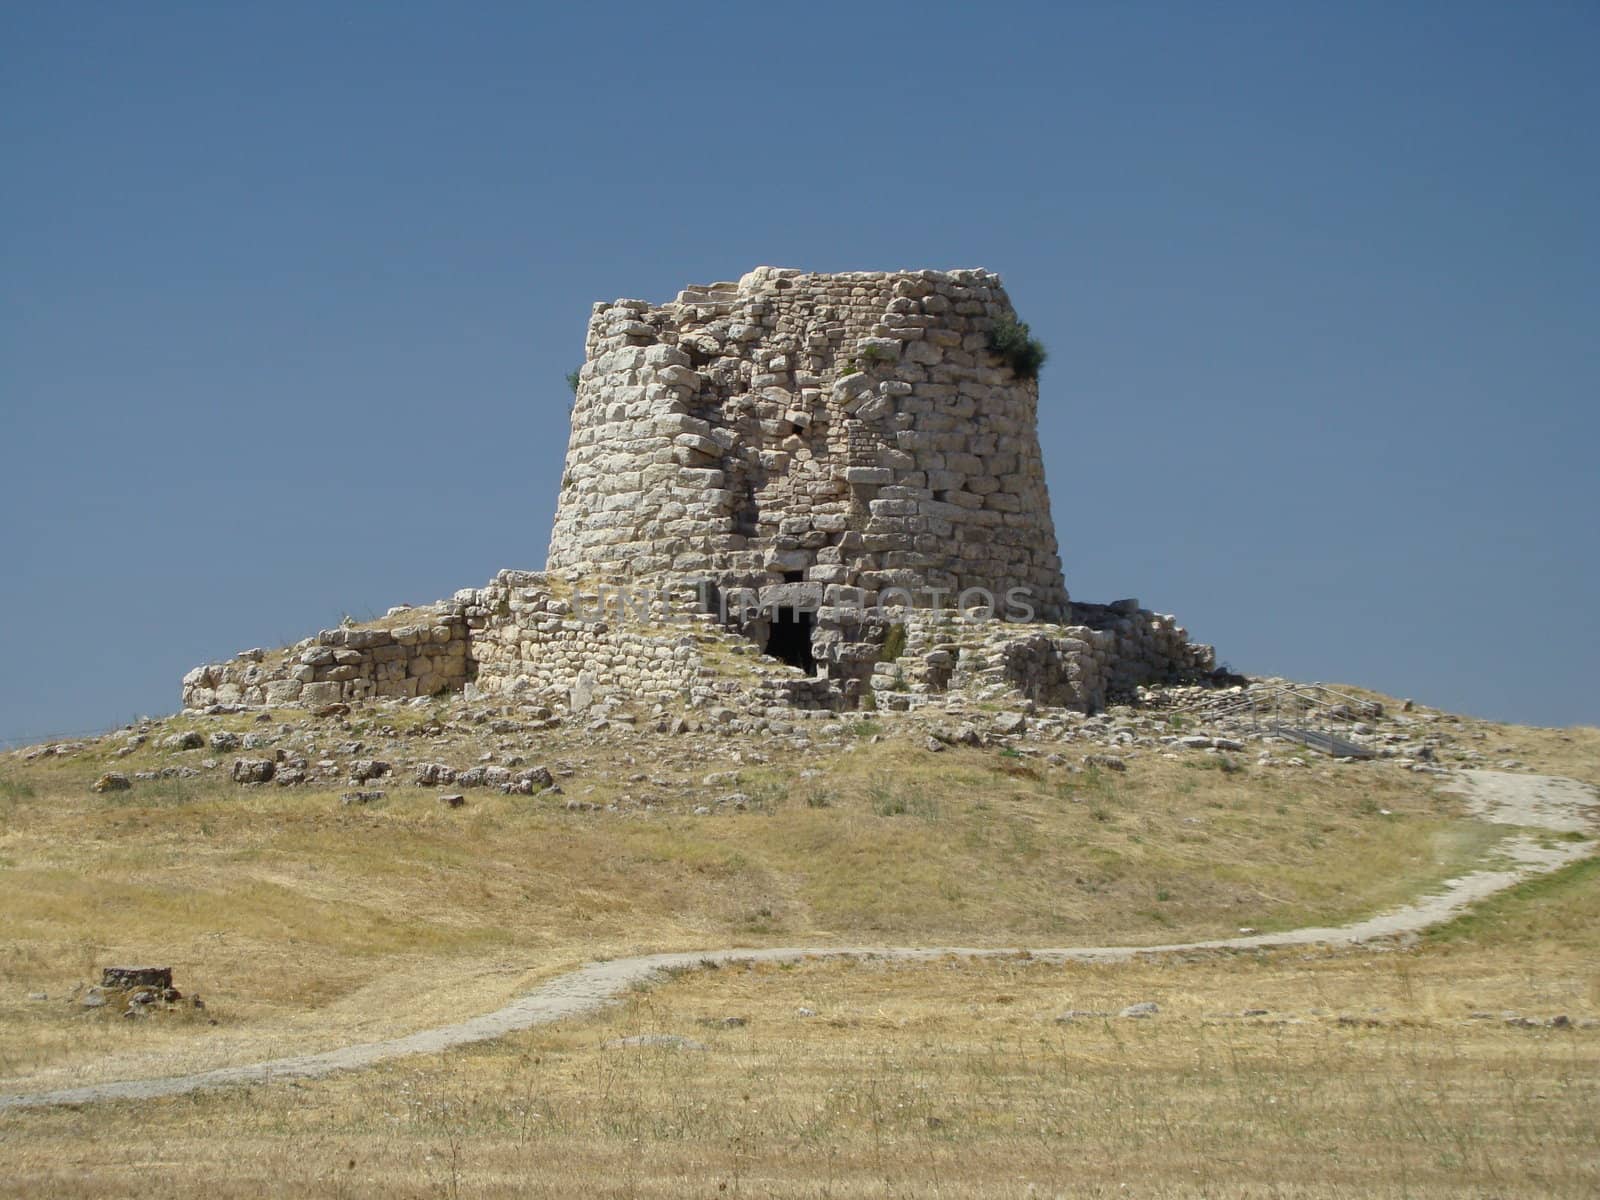 nuraghe in Sardinia, 3-4 thousands year old building